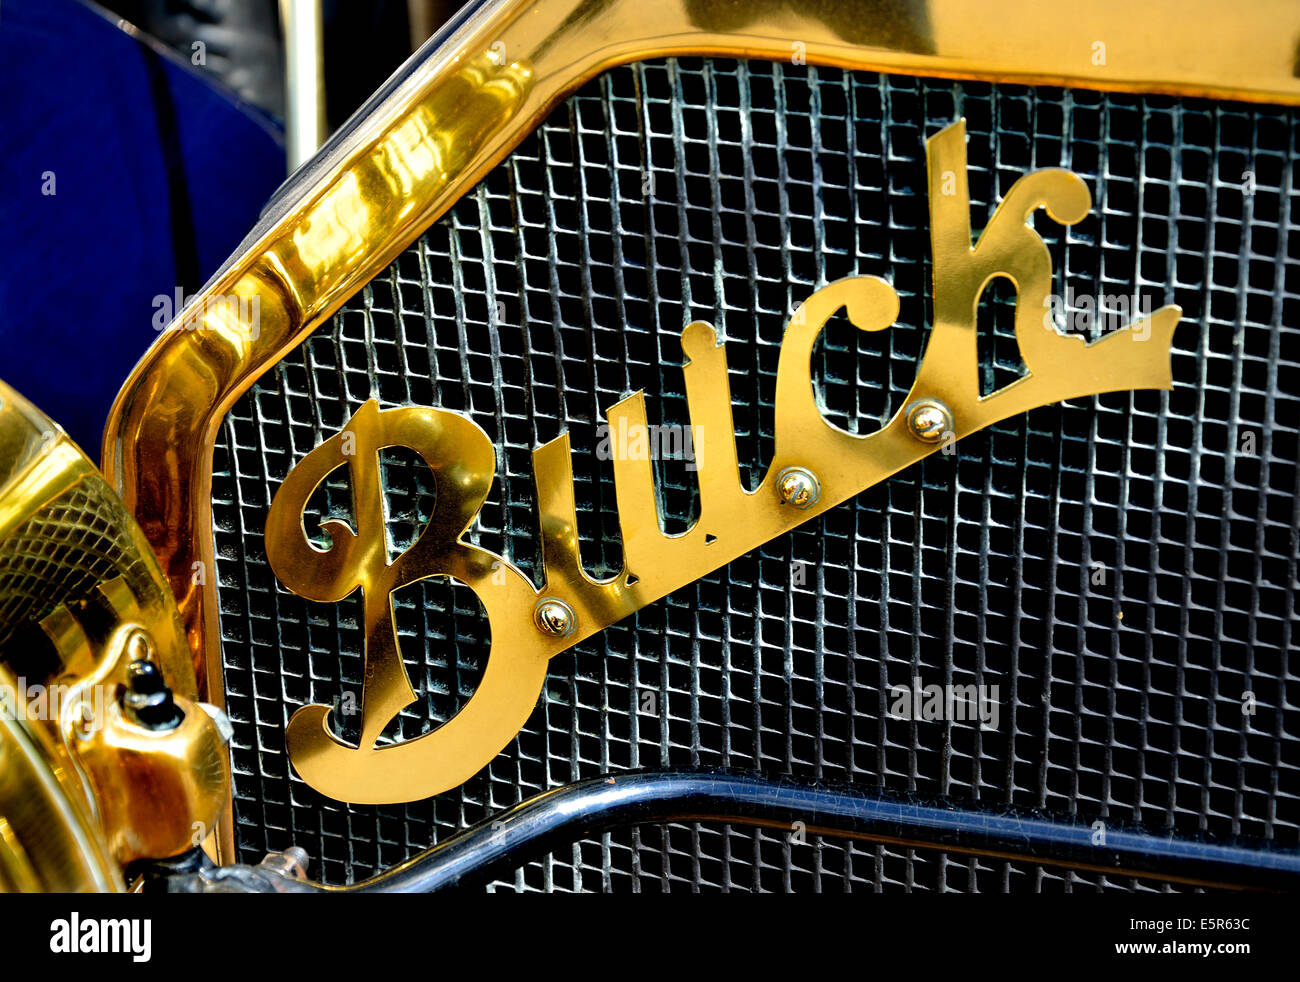 1910 vintage Buick car. Detail of front grill Stock Photo